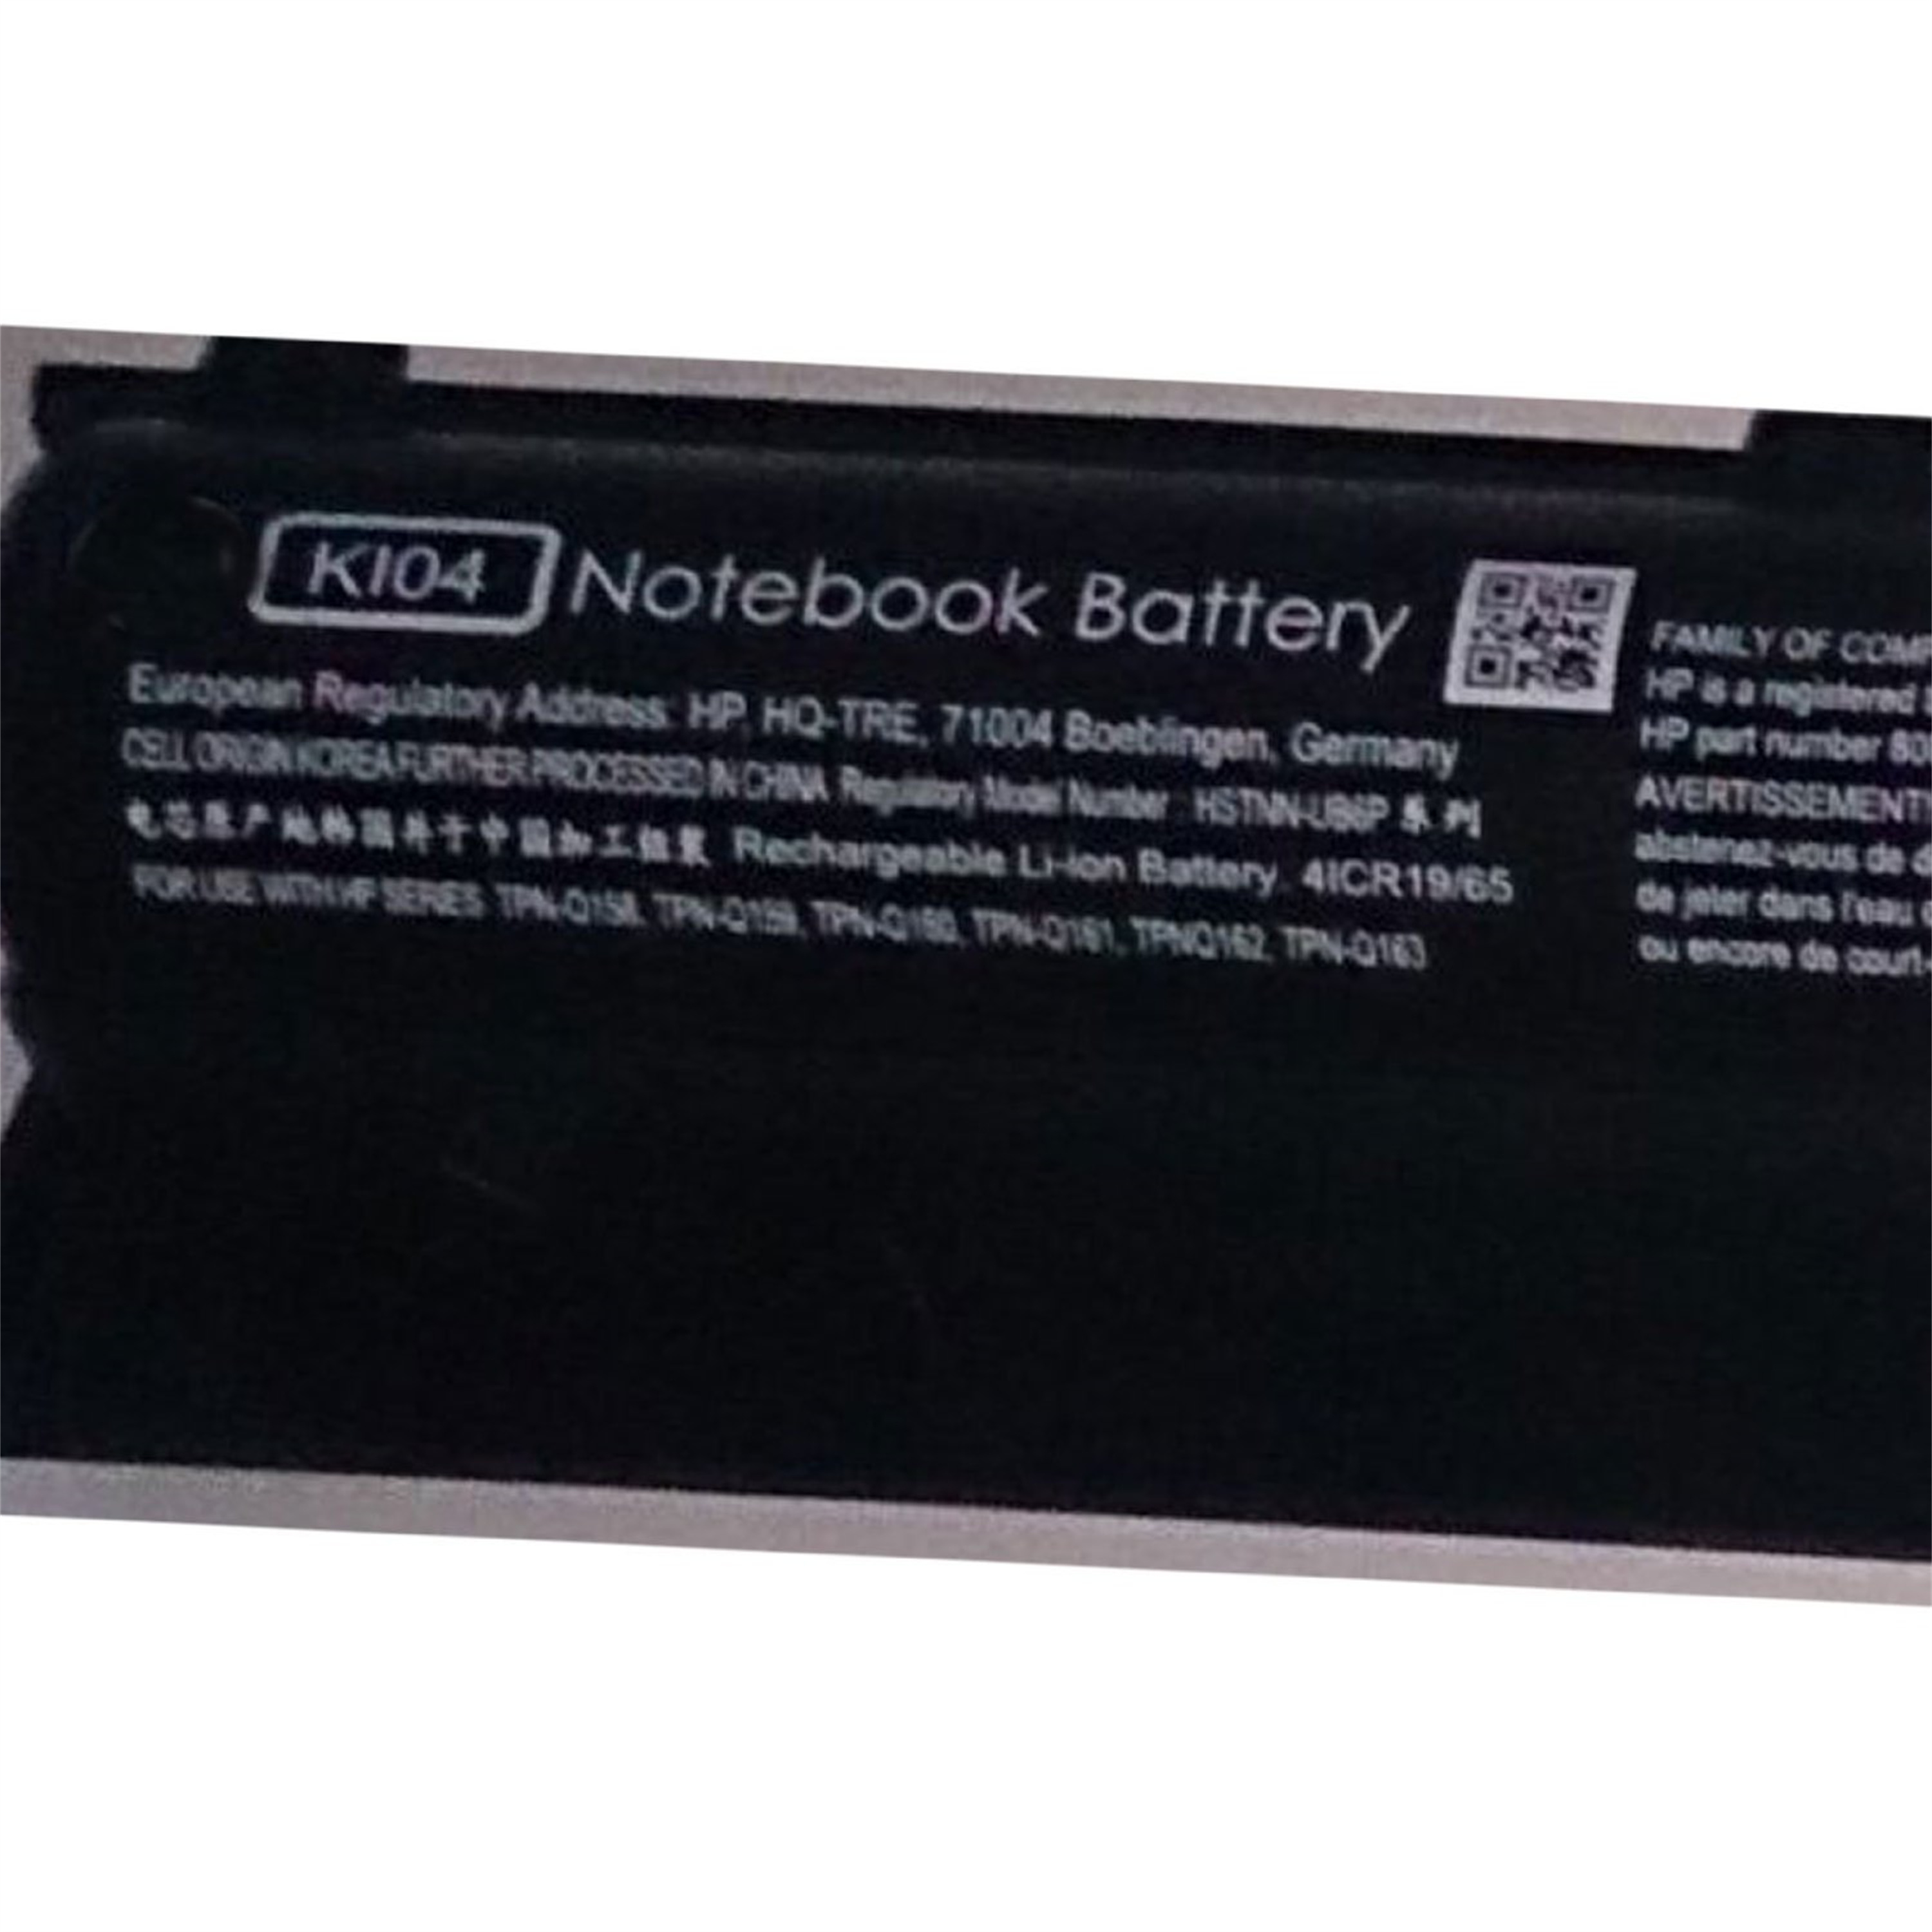 KI04 rechargeable lithium ion Notebook battery Laptop battery 14.8V 33Wh for HP laptop Pavilion 14-ab000 15-ab000 17-g000 series 800049-001 HSTNN-LB6S/DB6T